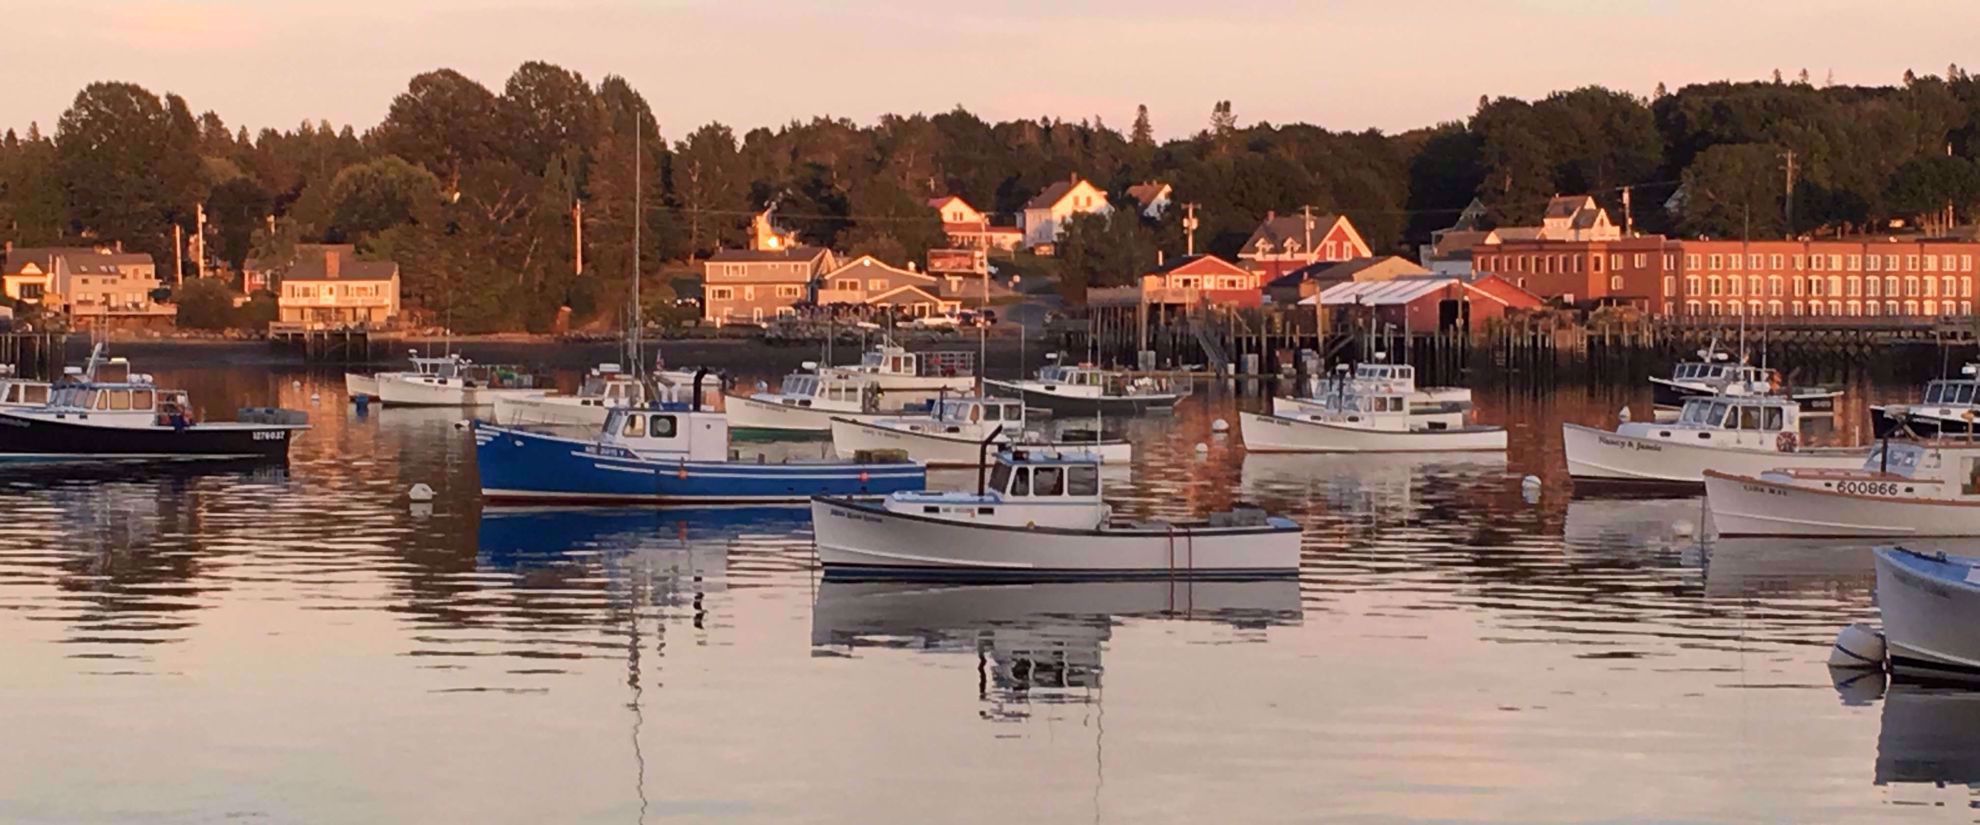 boats in harbor during sunset maine